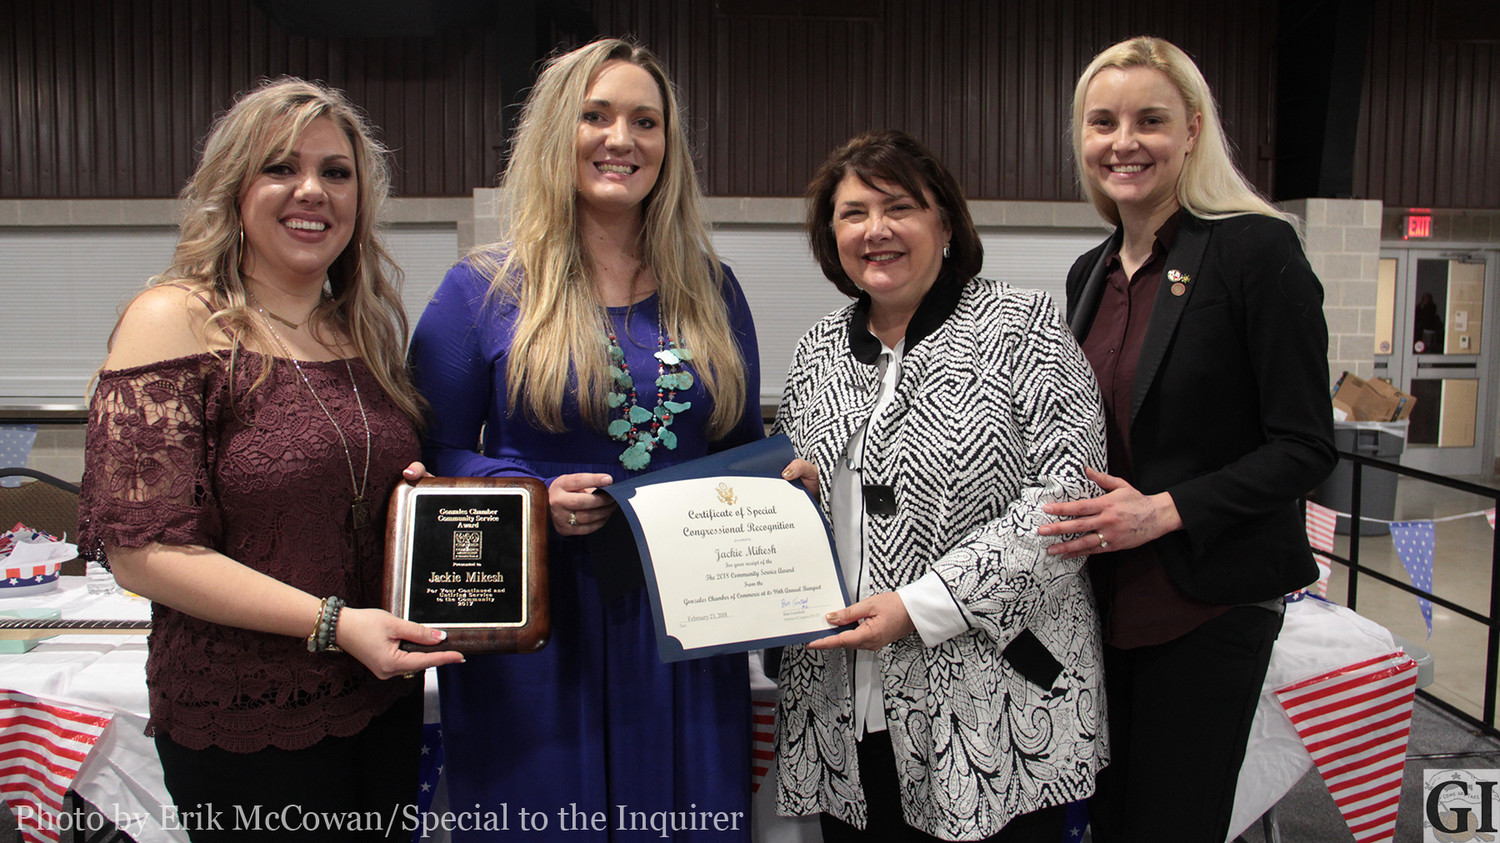 The Gonzales Chamber of Commerce held their annual chamber banquet, celebrating past, present and future board members as well as announcing the winners of two awards including the Community Service award, received by Jackie Mikesh.